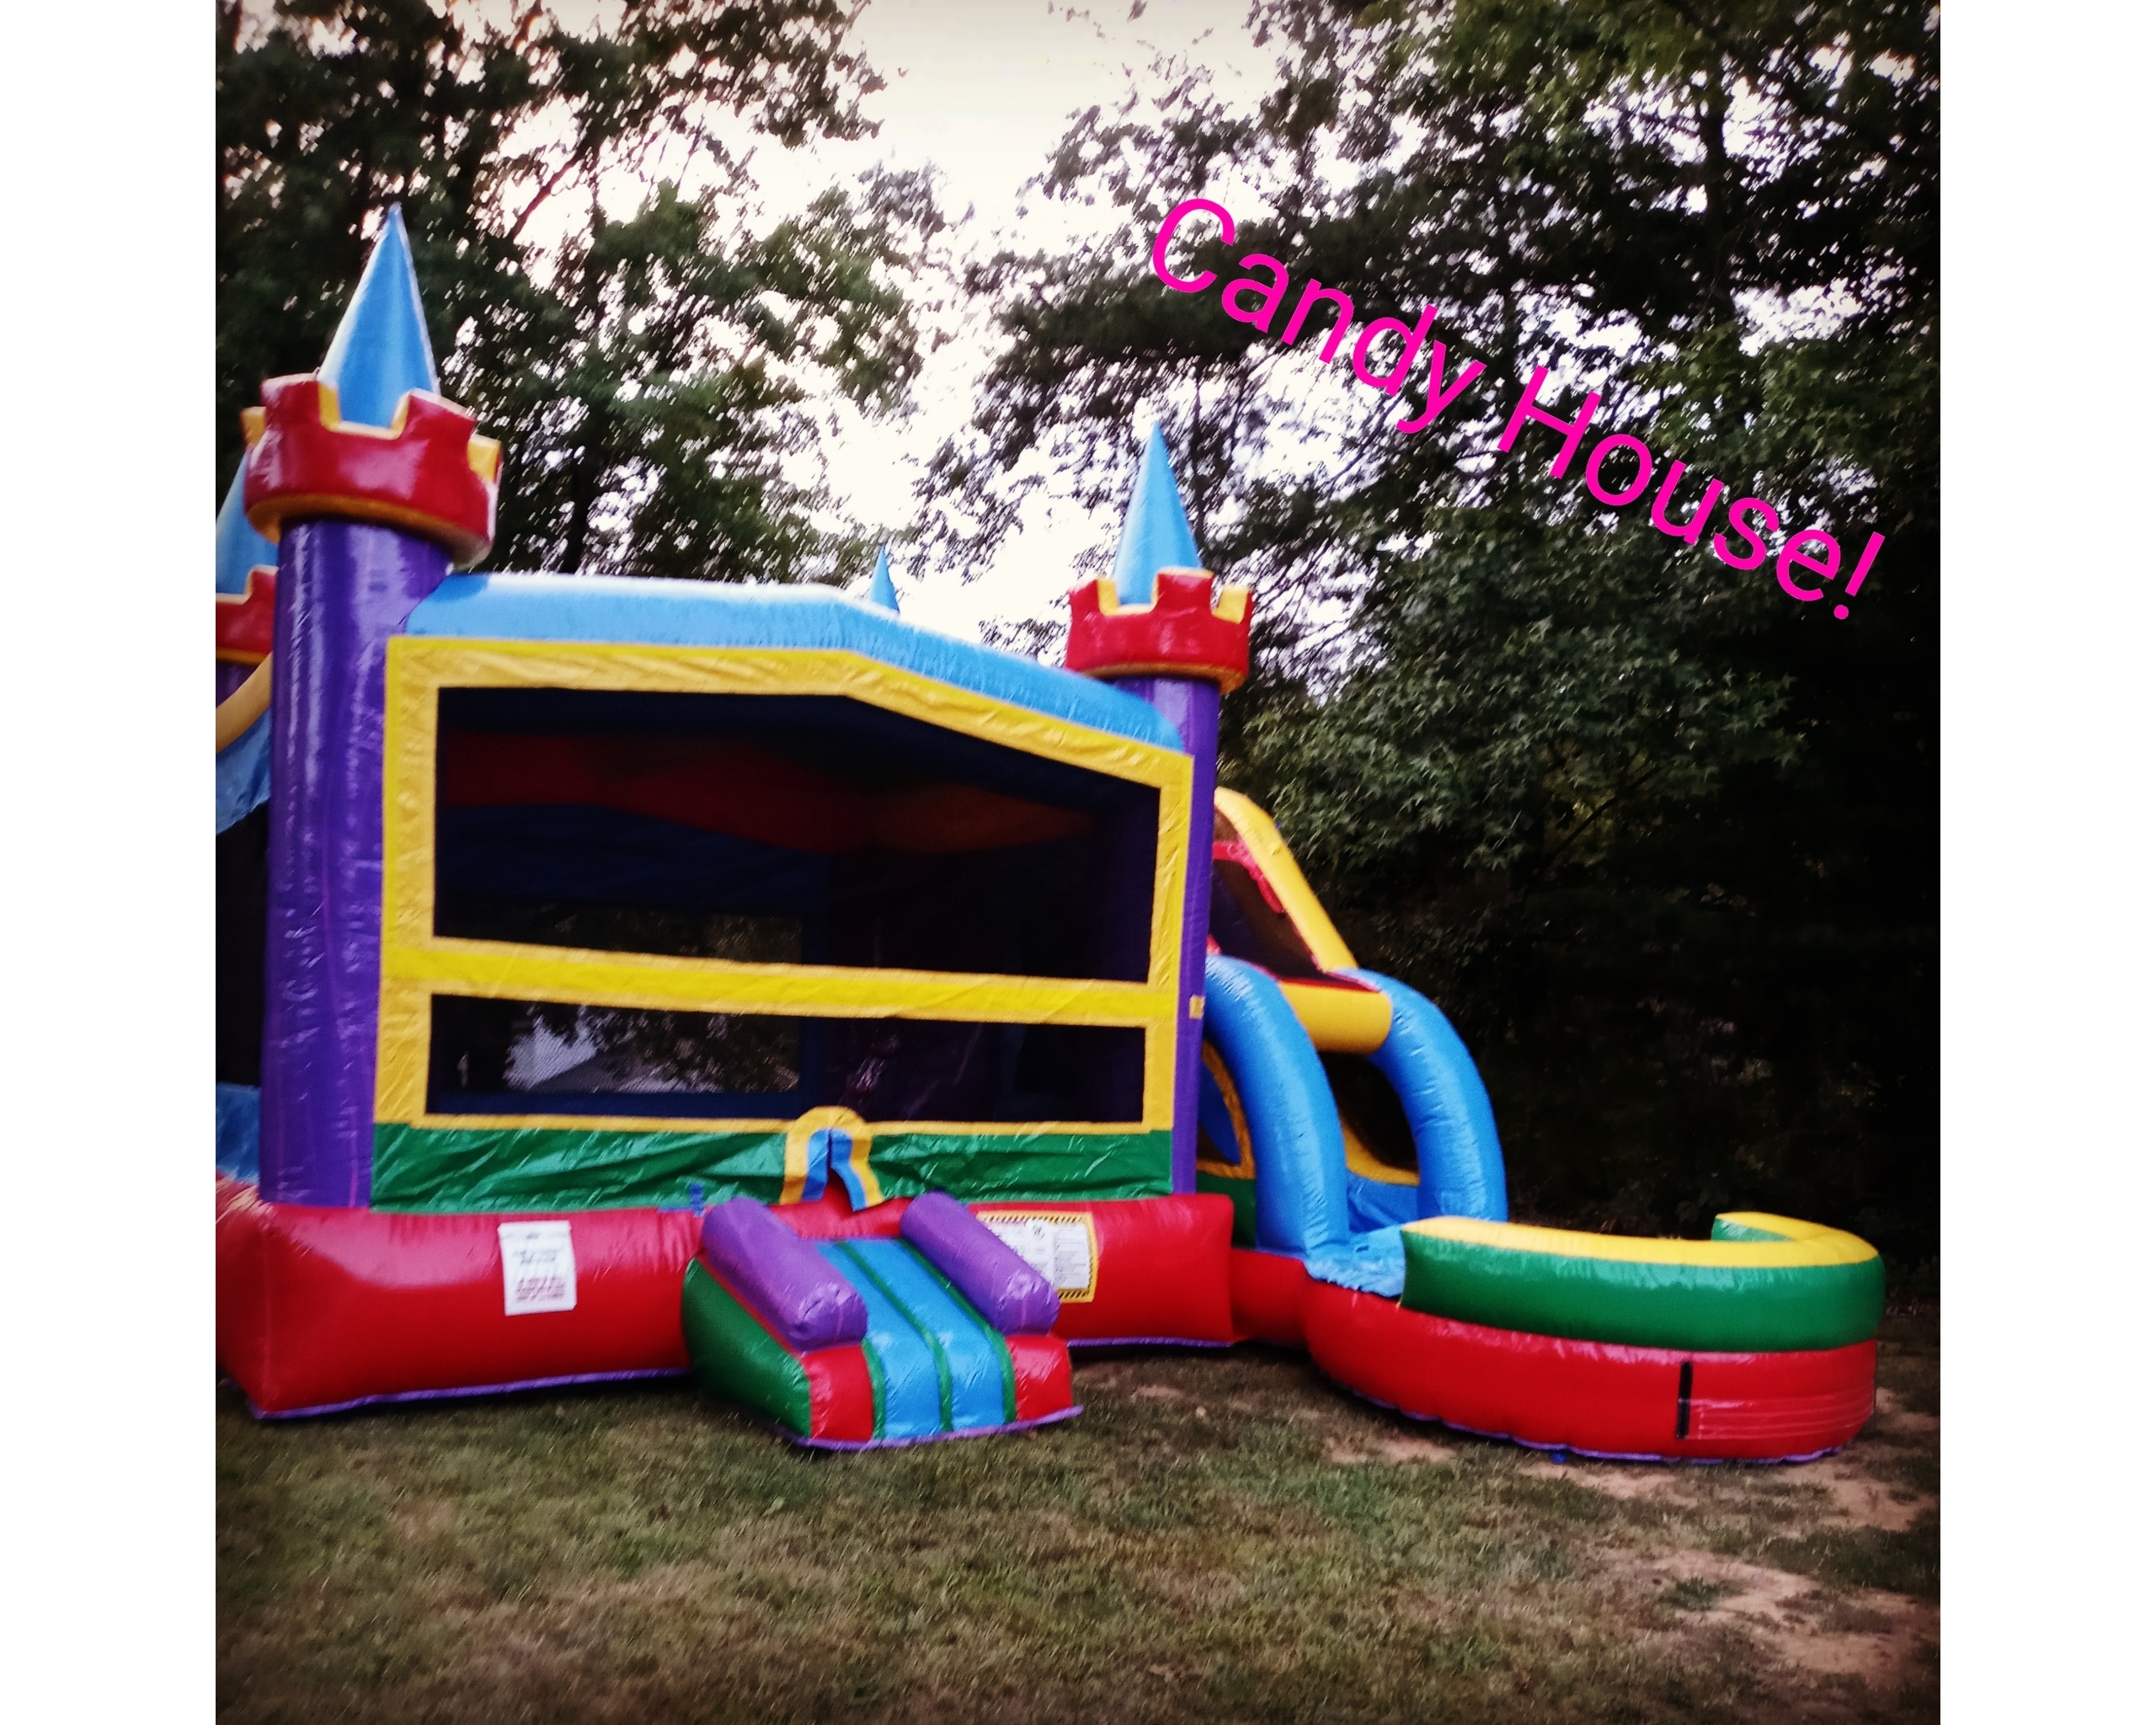 Chafers / Food Warmers - Bounce House & Inflatable Hire in Brockton,  Holbrook, Boston, Bridgewater, Easton, Randolph, Avon & More